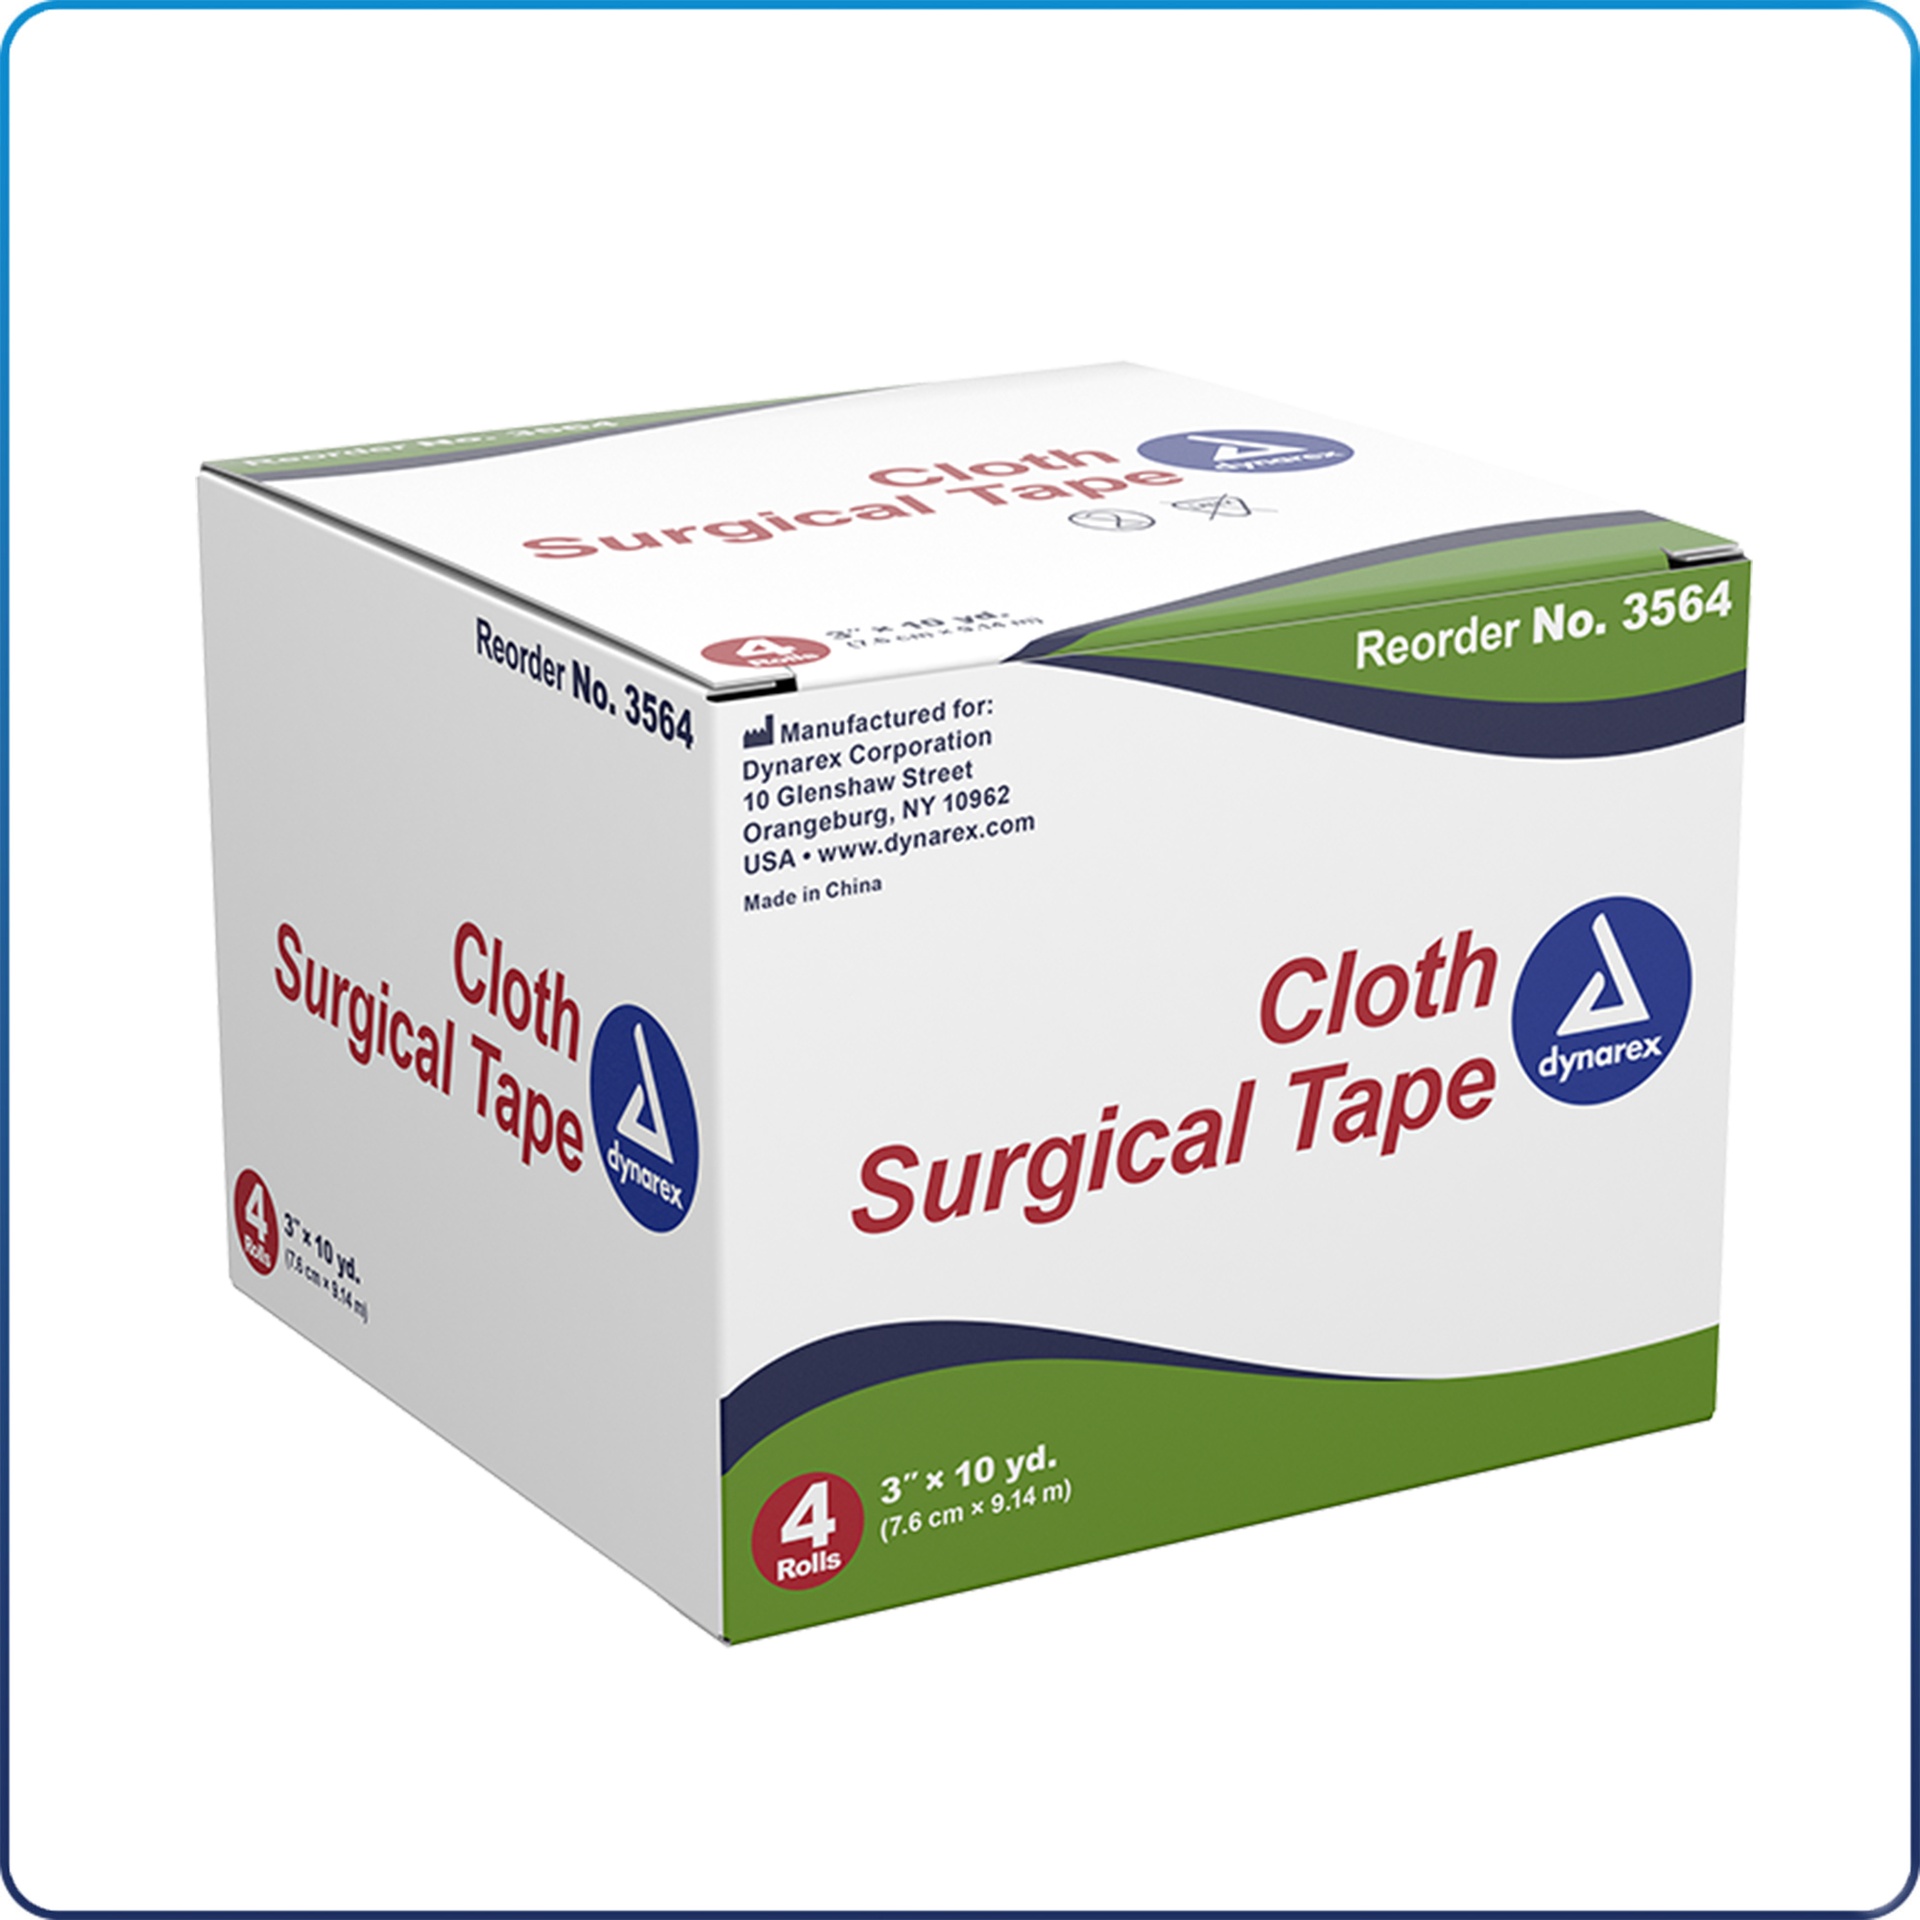 [DYN3564] Cloth Surgical Tape